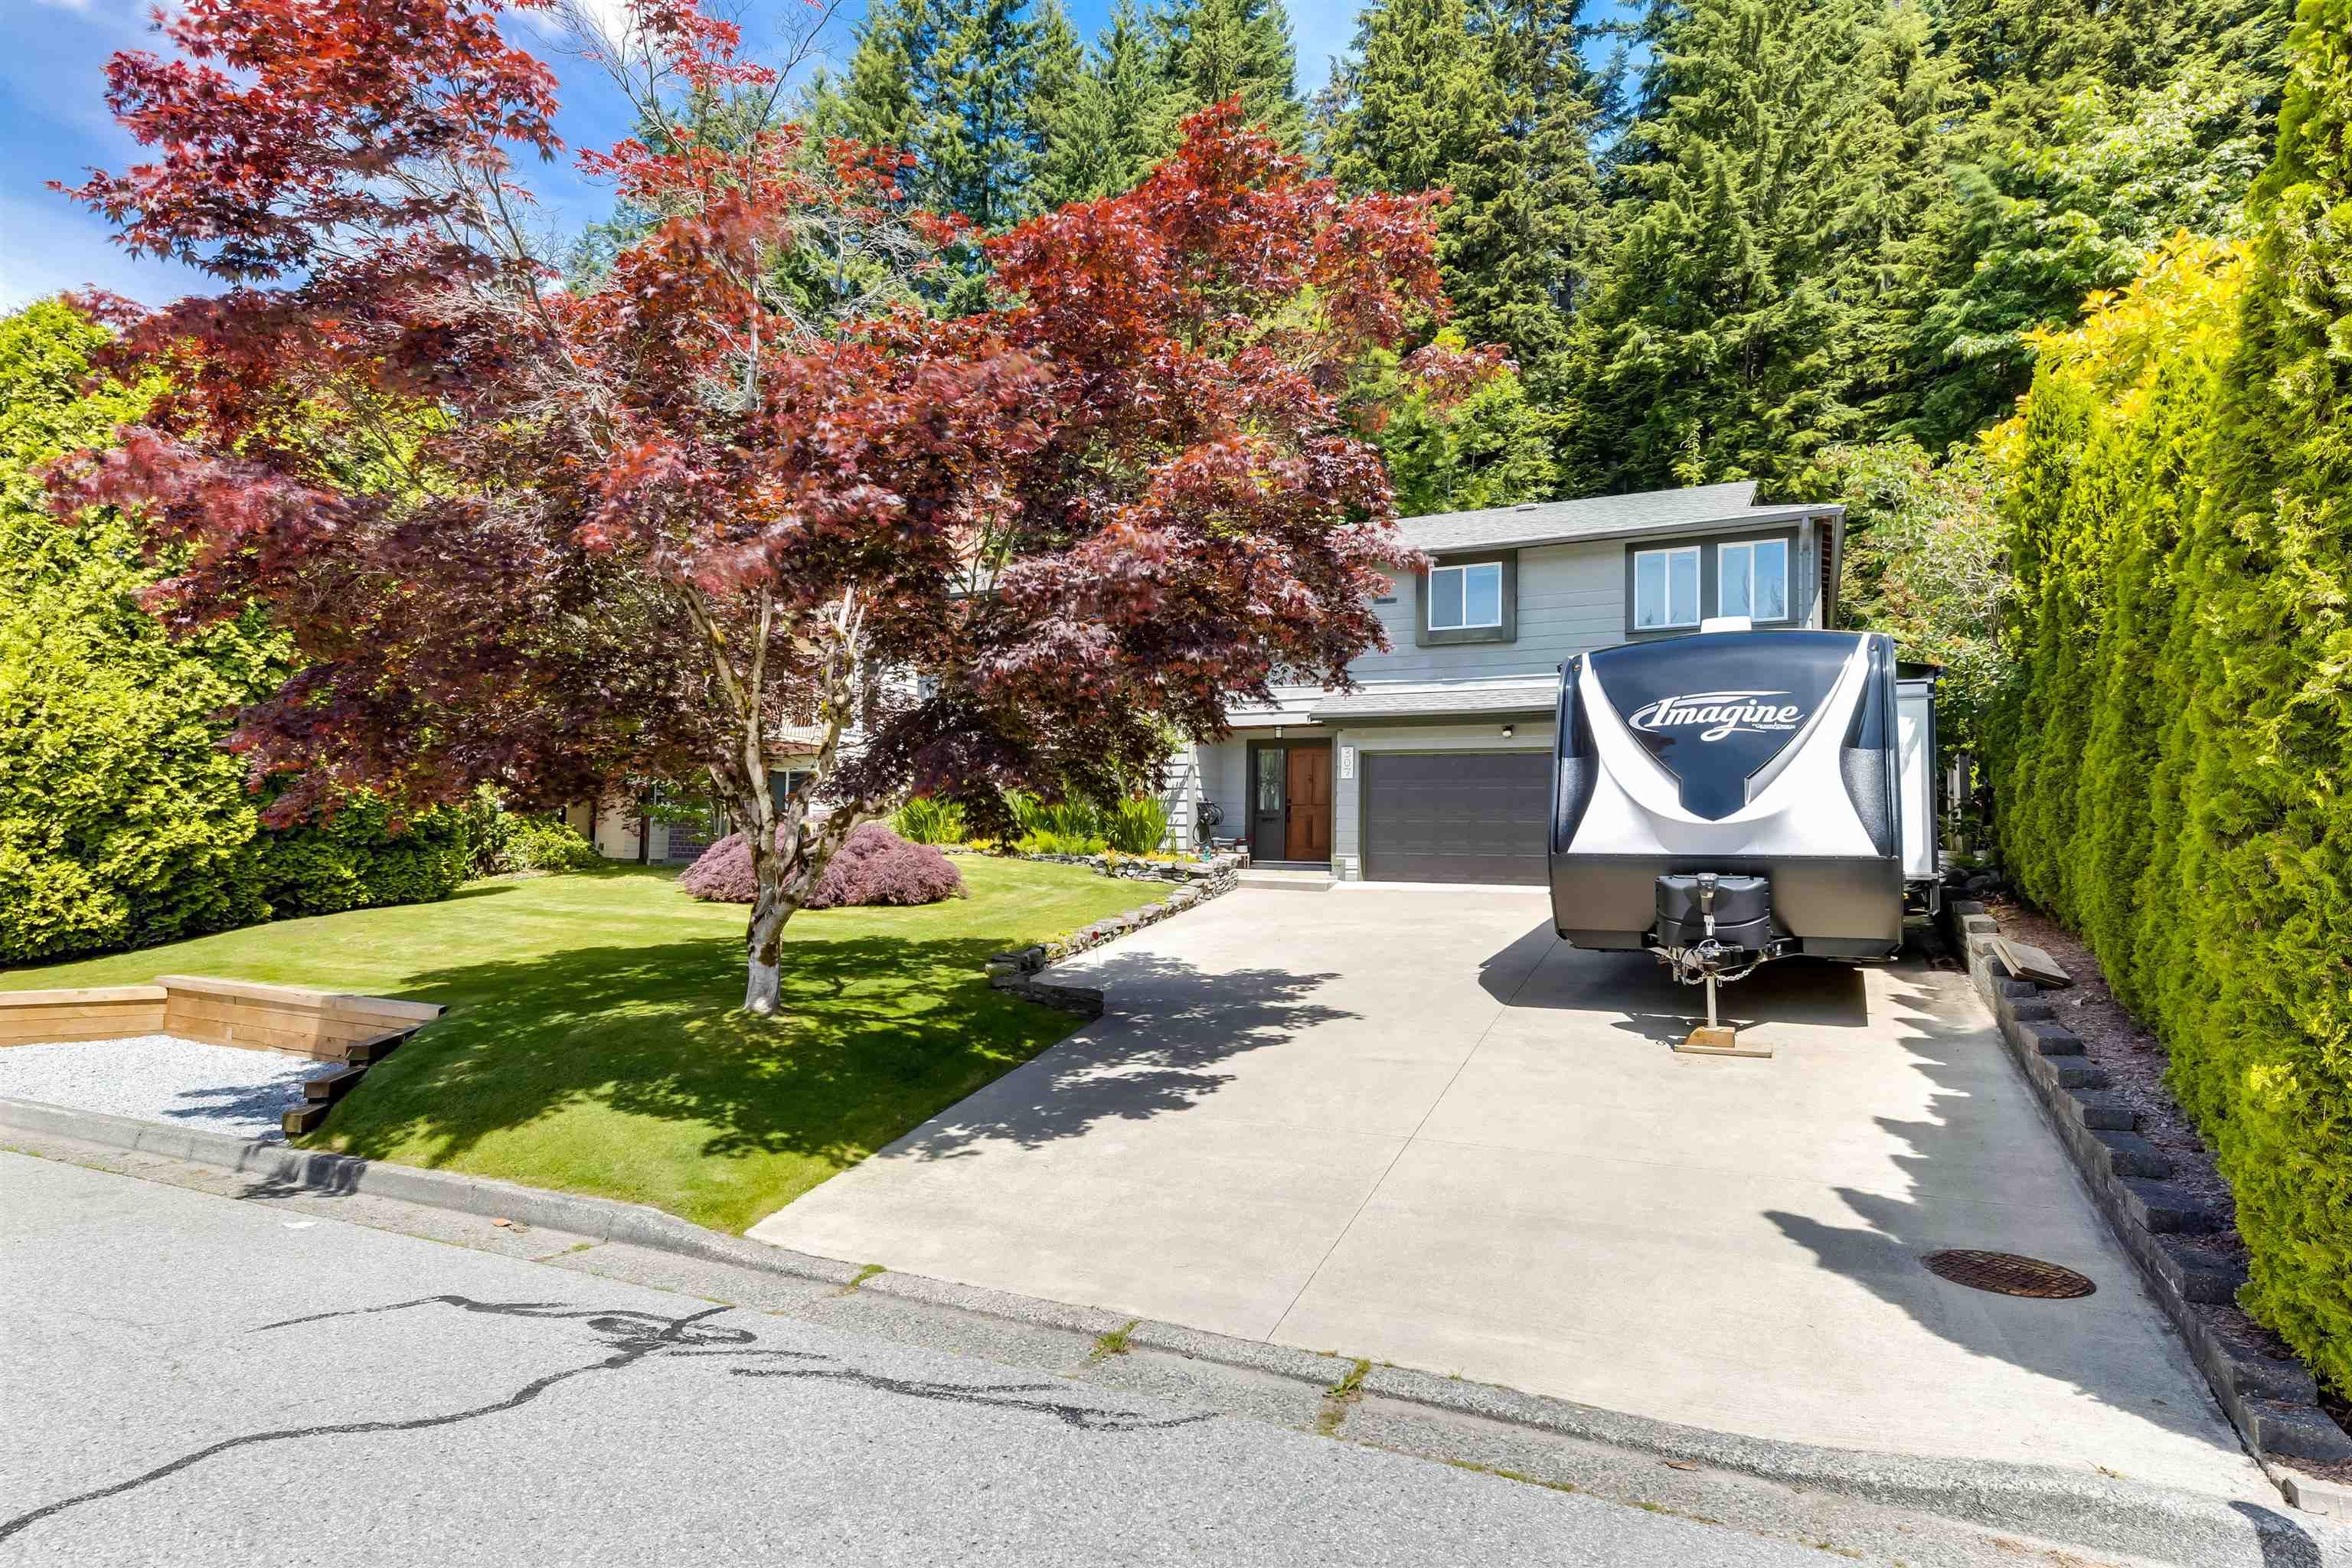 Main Photo: 307 APRIL ROAD in Port Moody: Barber Street House for sale : MLS®# R2621633